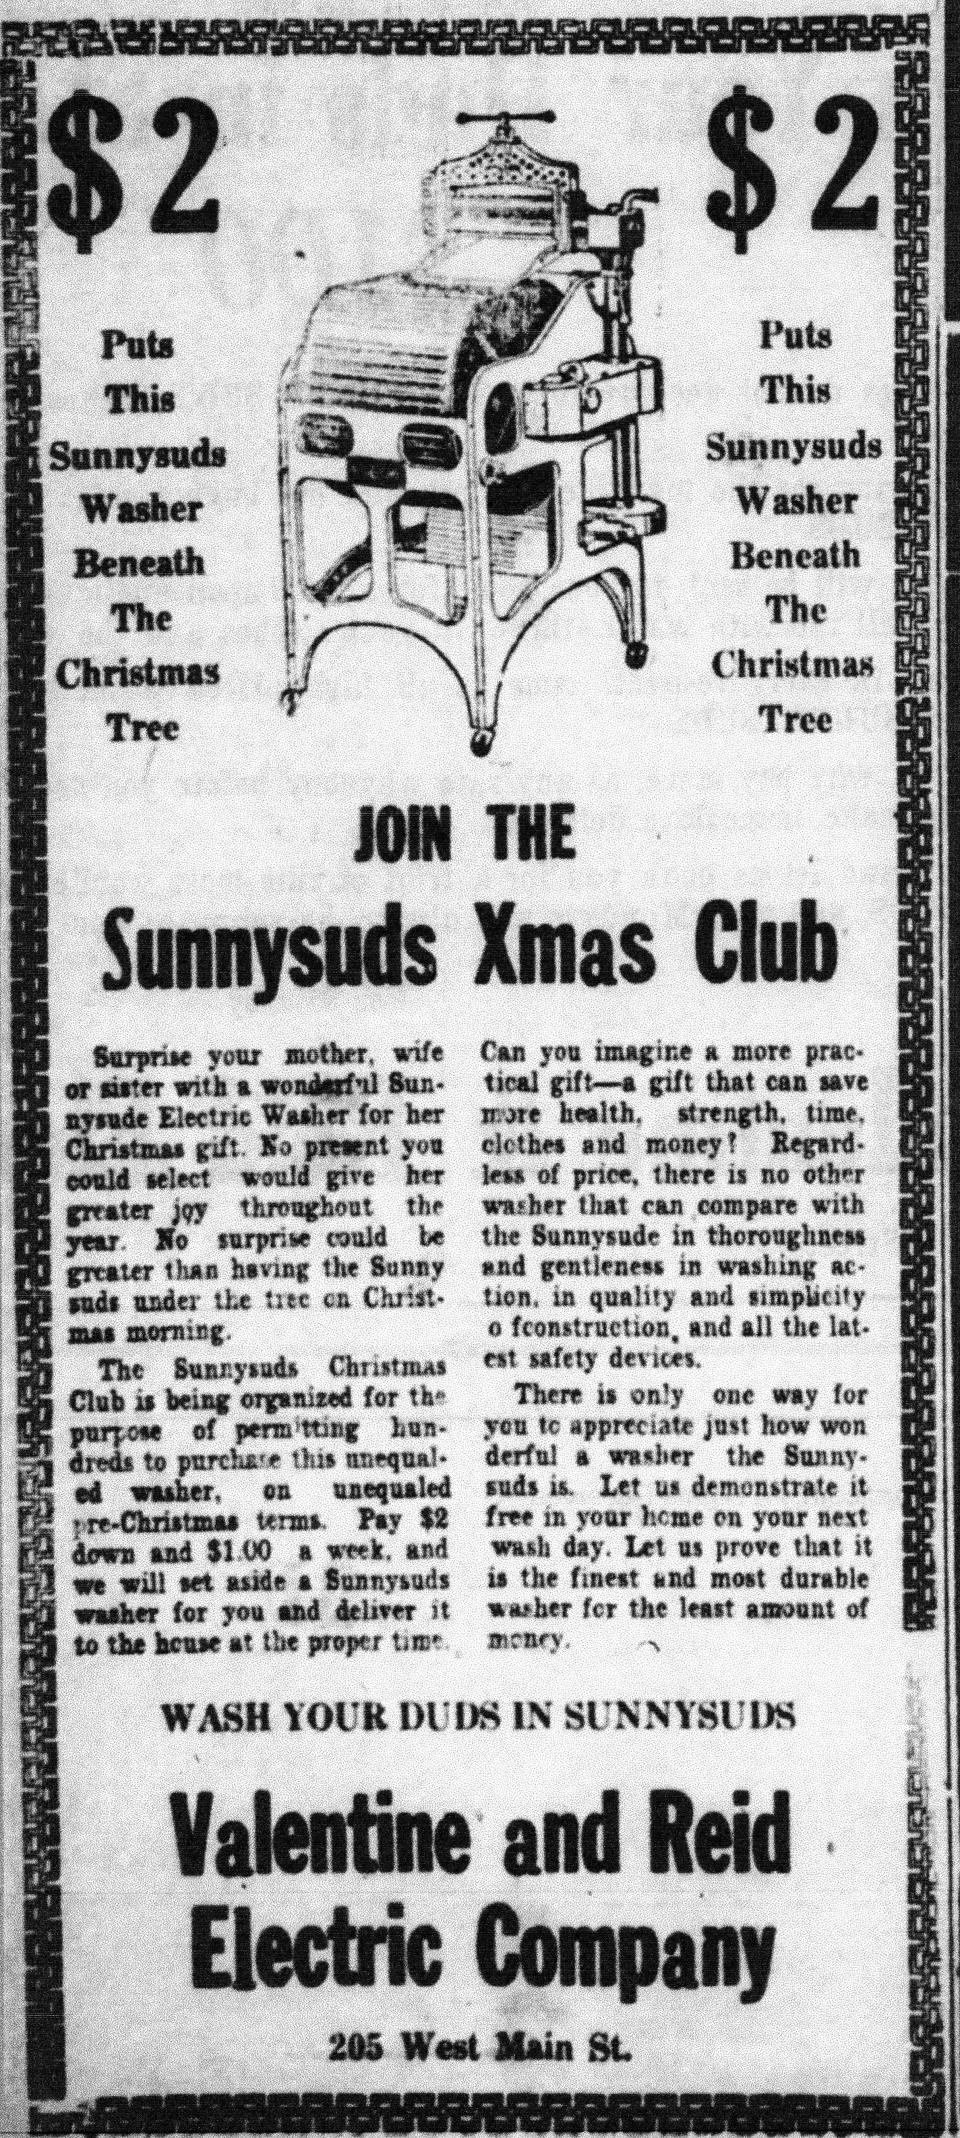 The Sunnysuds Washer was the most interesting gift advertised in 1922 for 
a mother, wife or sister -- and the ad suggested putting it under the tree! 
(Daily Eagle 8 Dec. 1922)